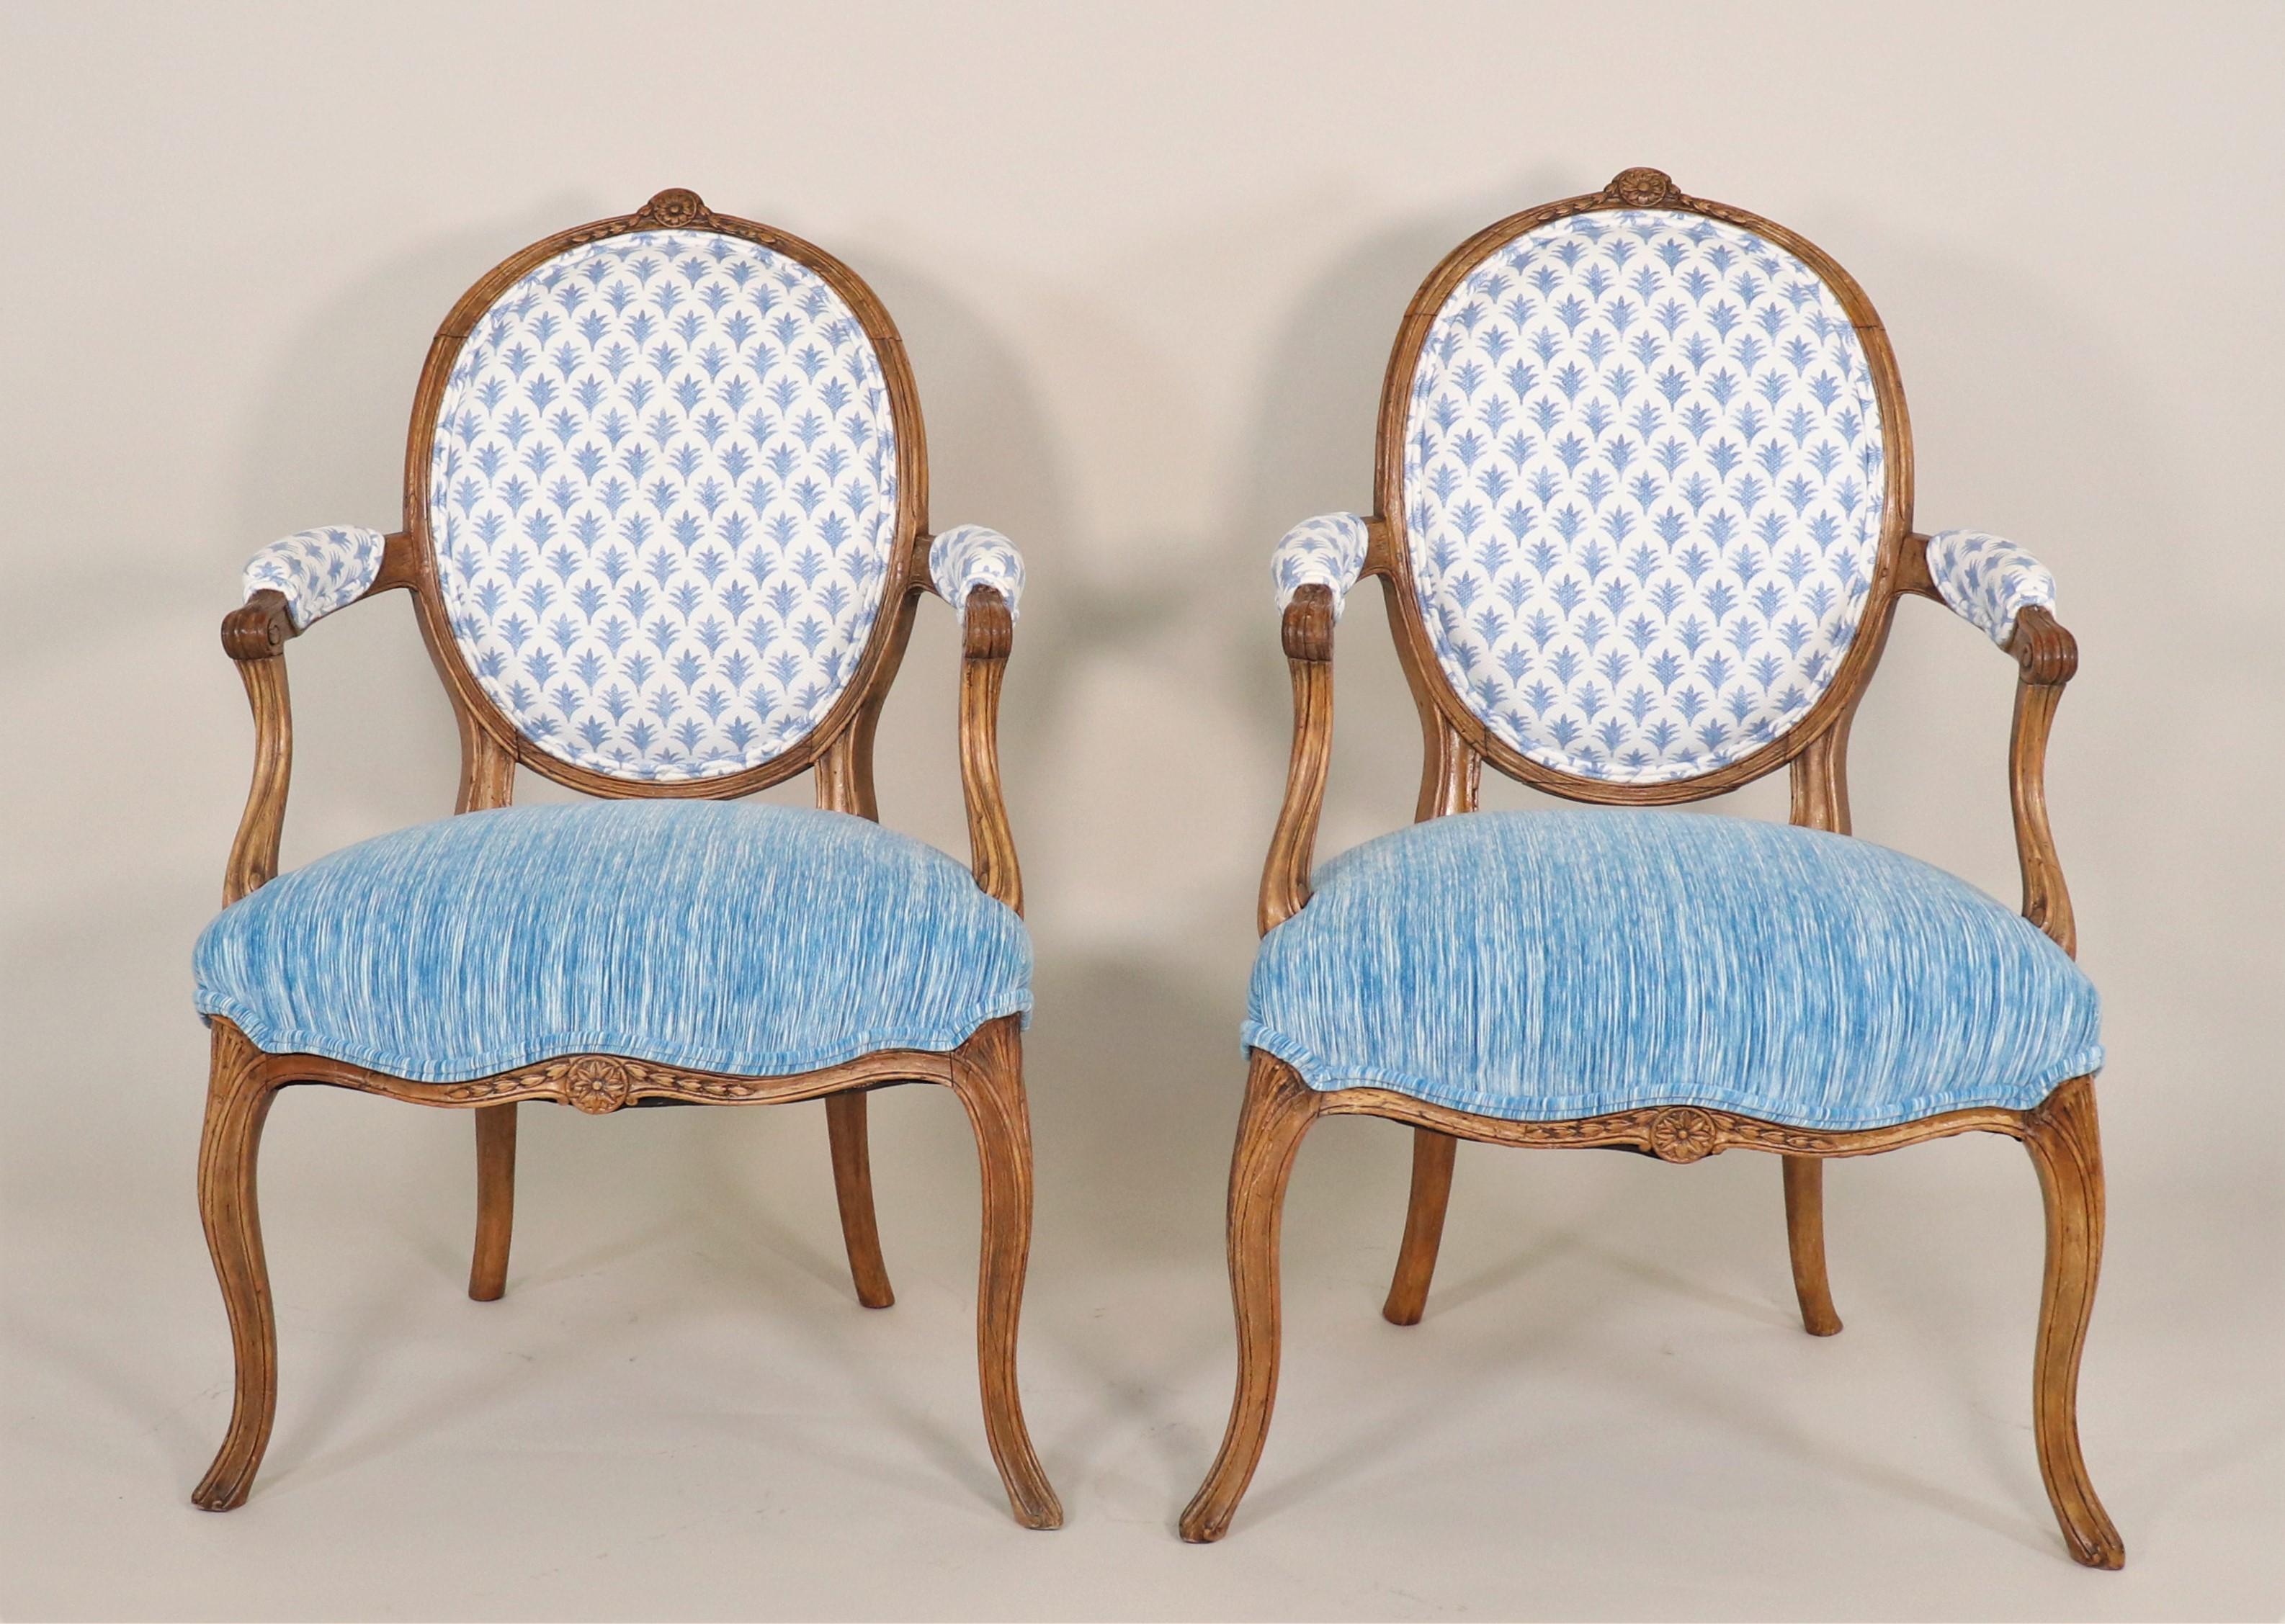 Pair of mid-19th century French Régence style Fauteuils: full of French charm, this French Régence Style pair of armchairs have been updated with modern fabrics that are in keeping with the spirit of the period. French Régence was a brief period